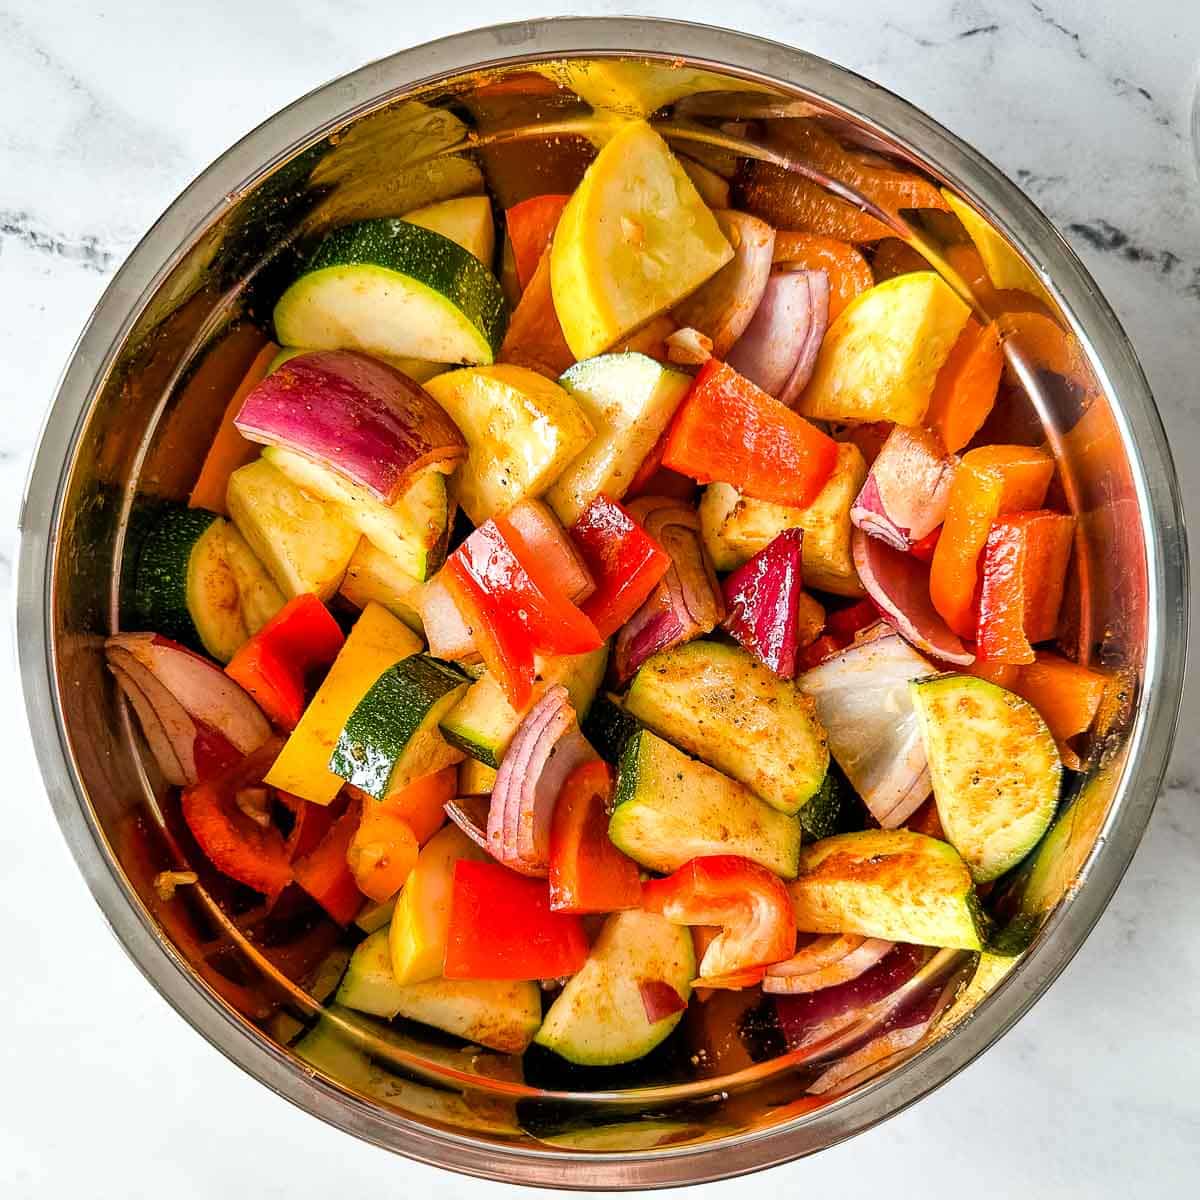 Cut vegetables in a stainless steel bowl seasoned with salt, pepper, cayenne, and olive oil.